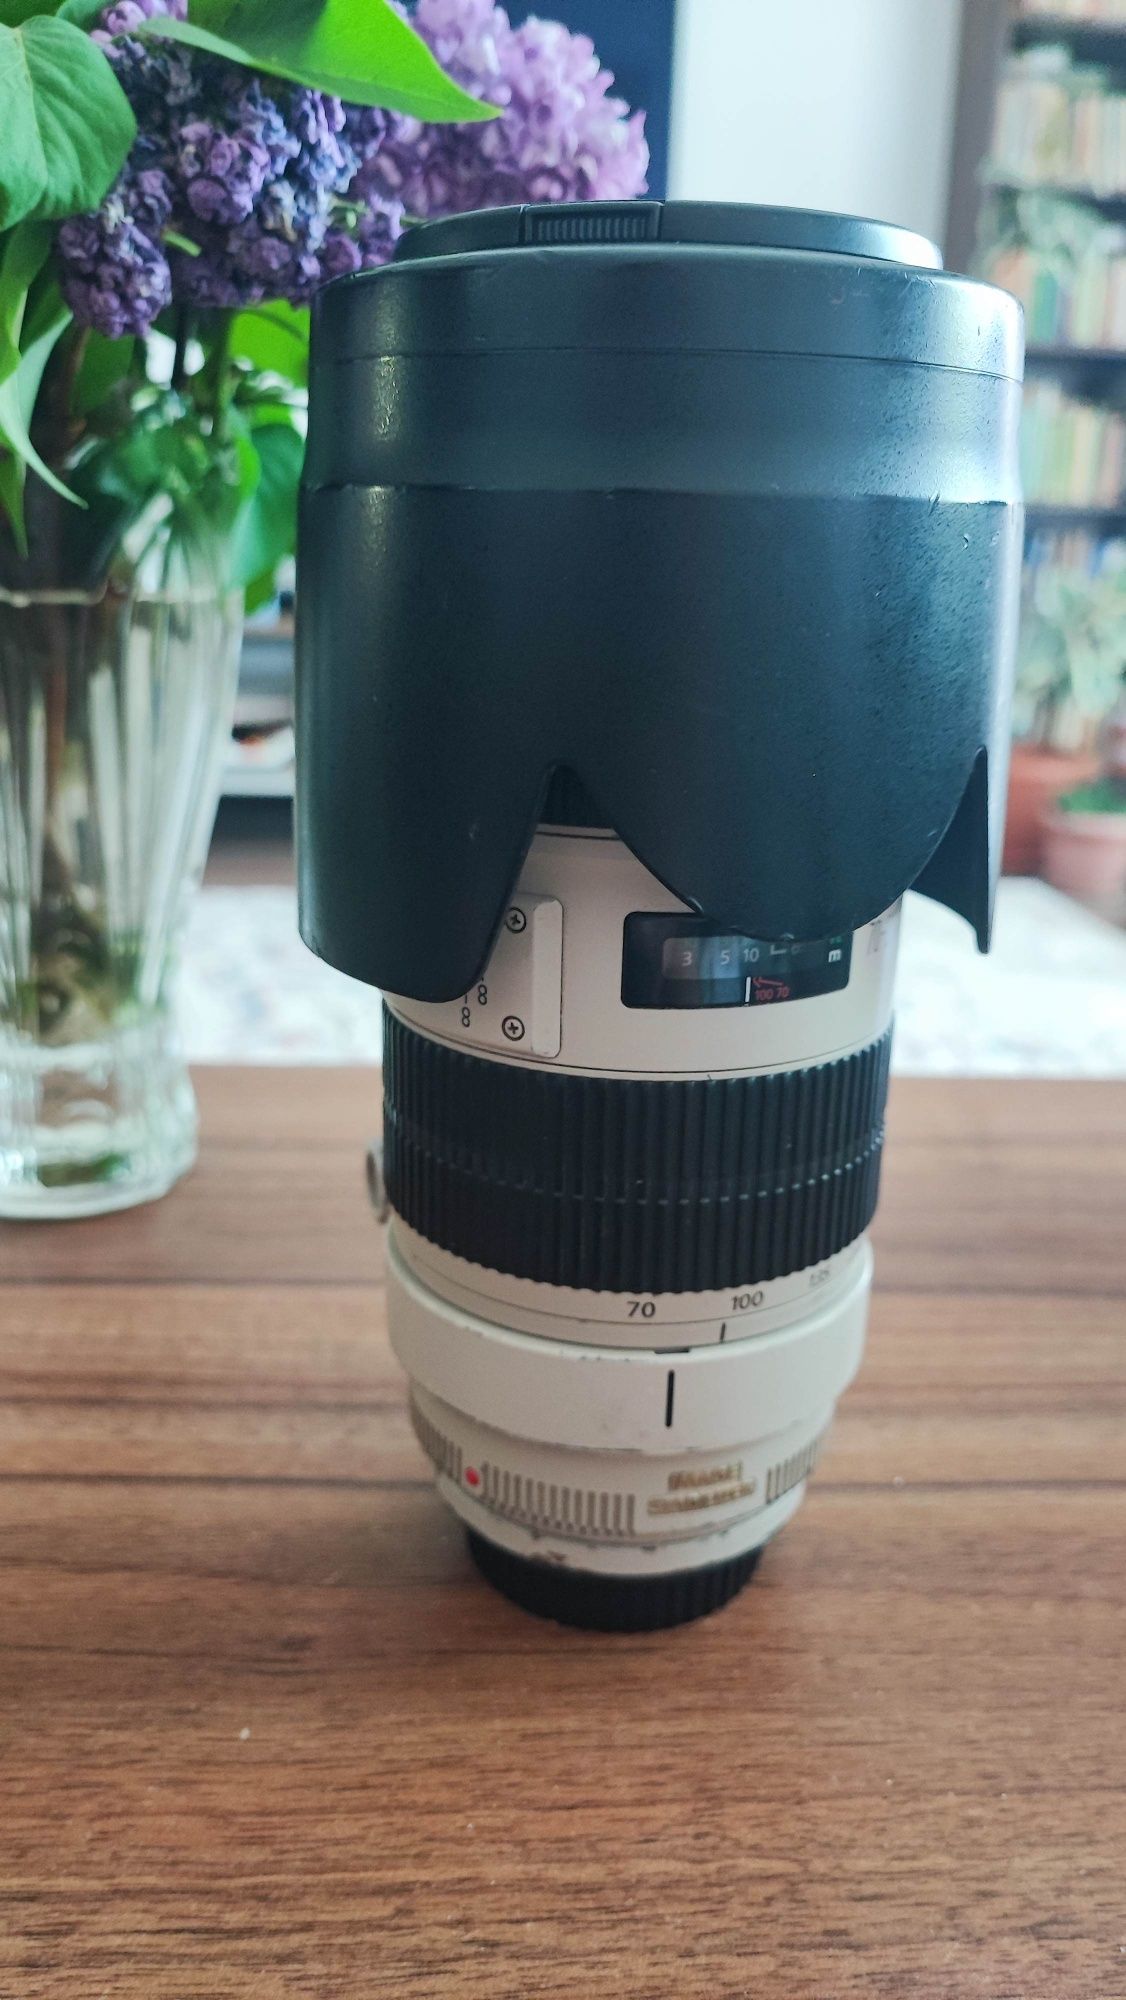 Canon 70-200 mm f2.8 L II IS USM